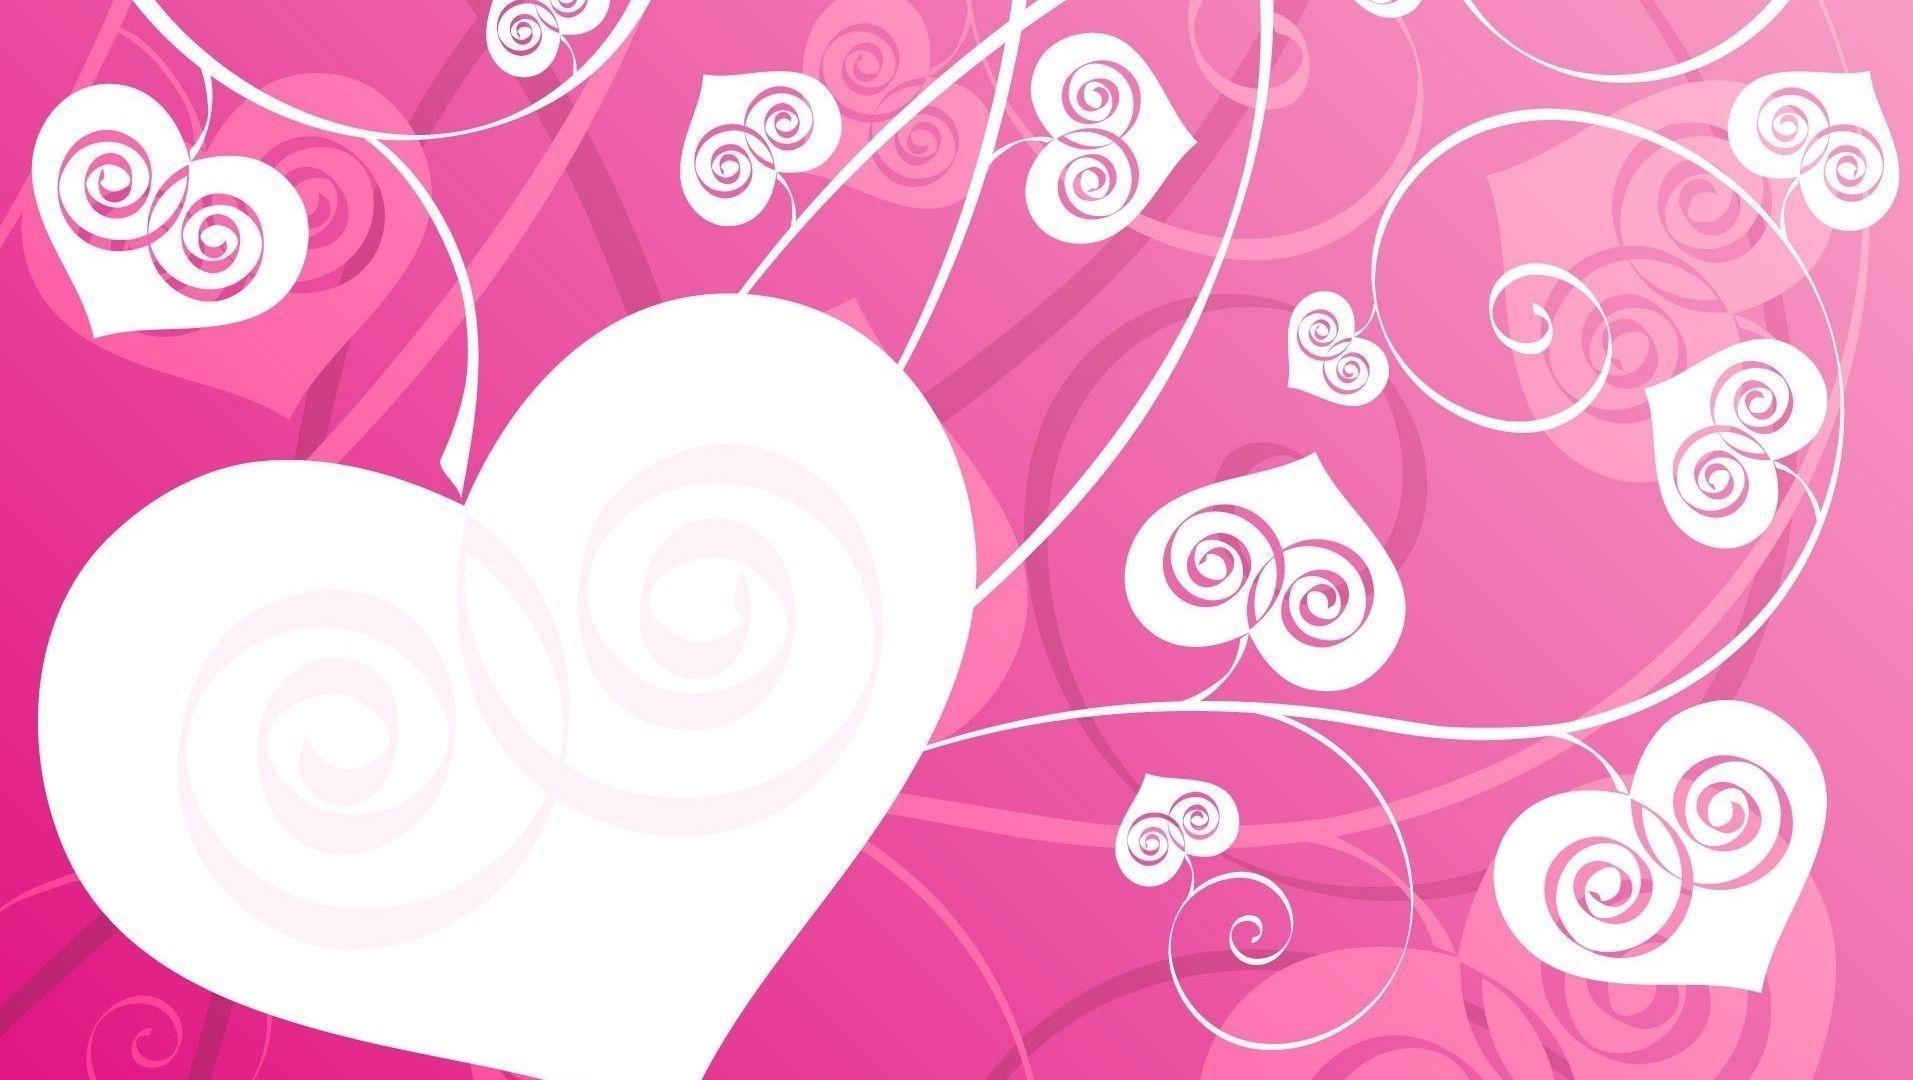 Vetor Design of White Love Hearts on Pink Background Free Stock